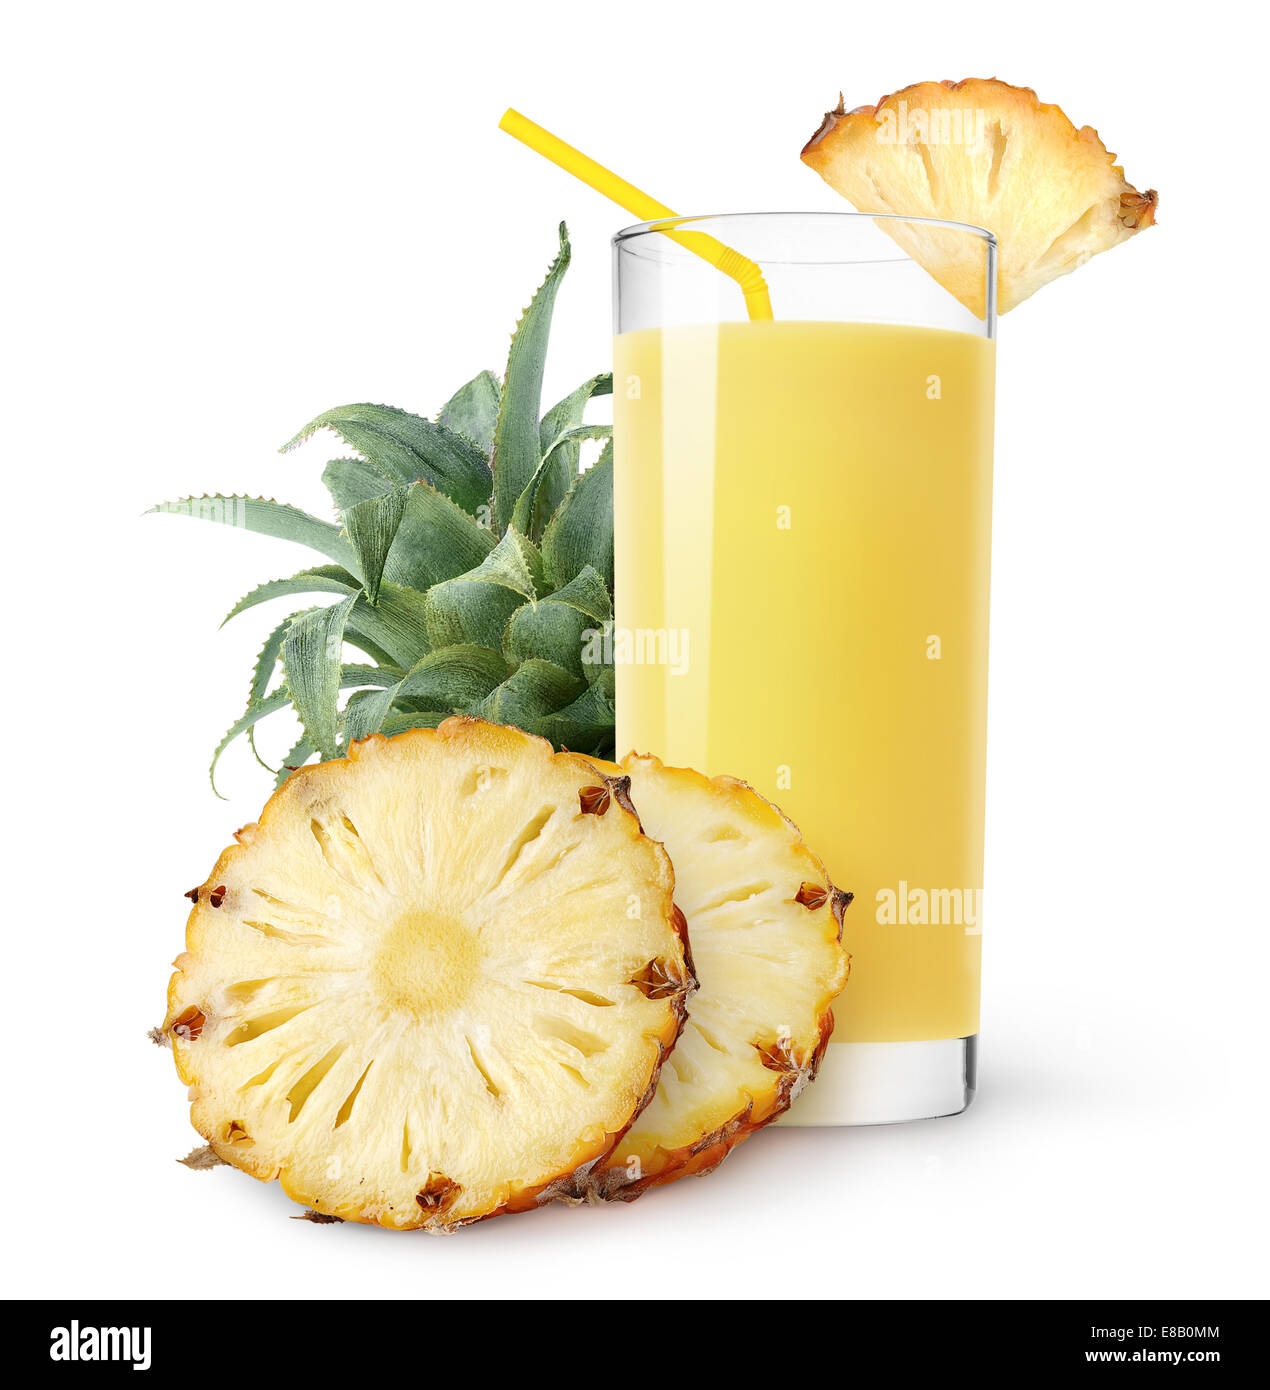 Jus d'ananas et de tranches d'ananas isolated on white Banque D'Images